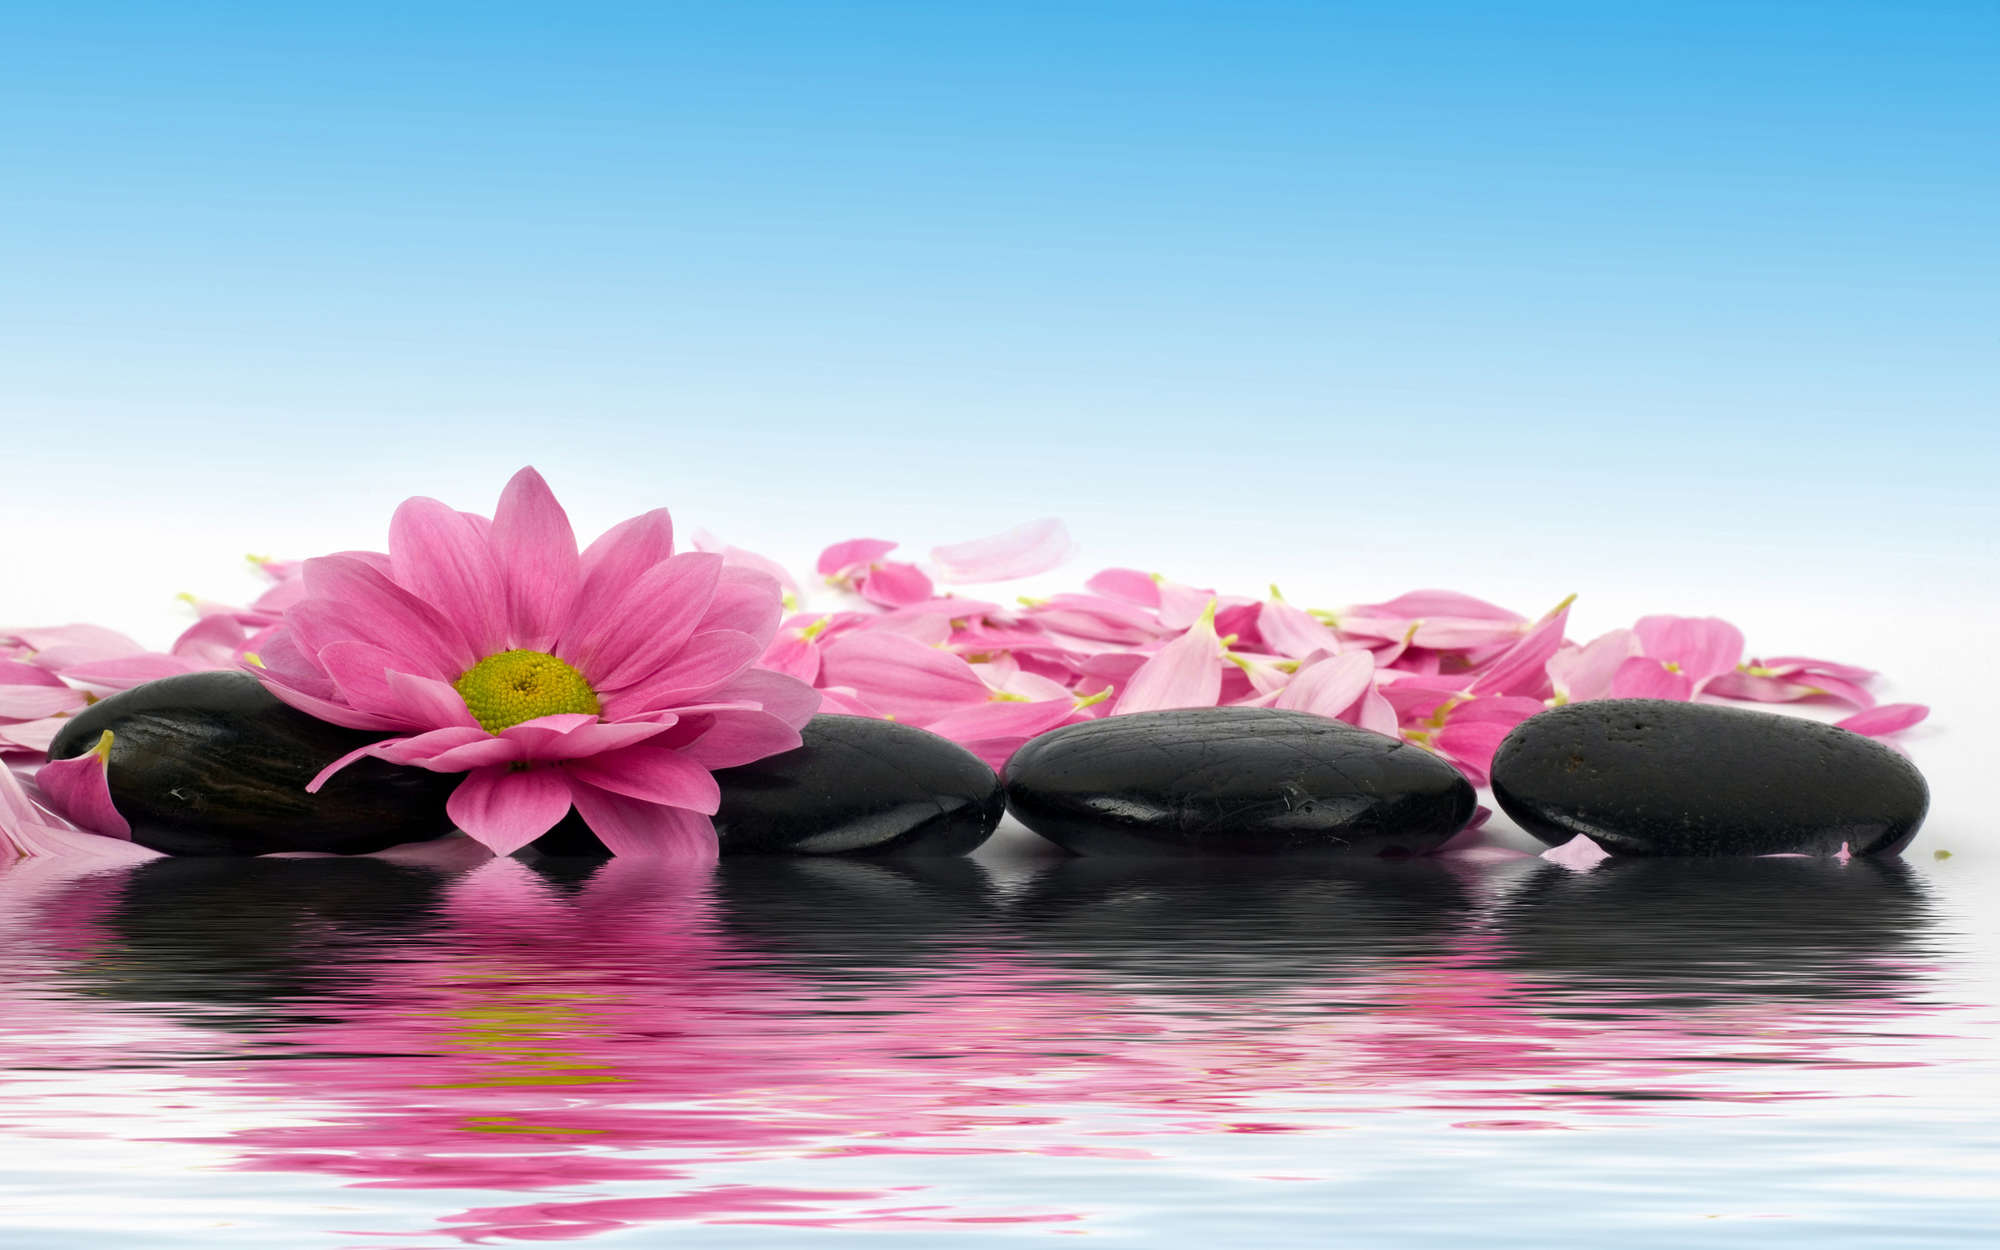             Water Lilies and Wellness Stones Wallpaper - Premium Smooth Non-woven
        